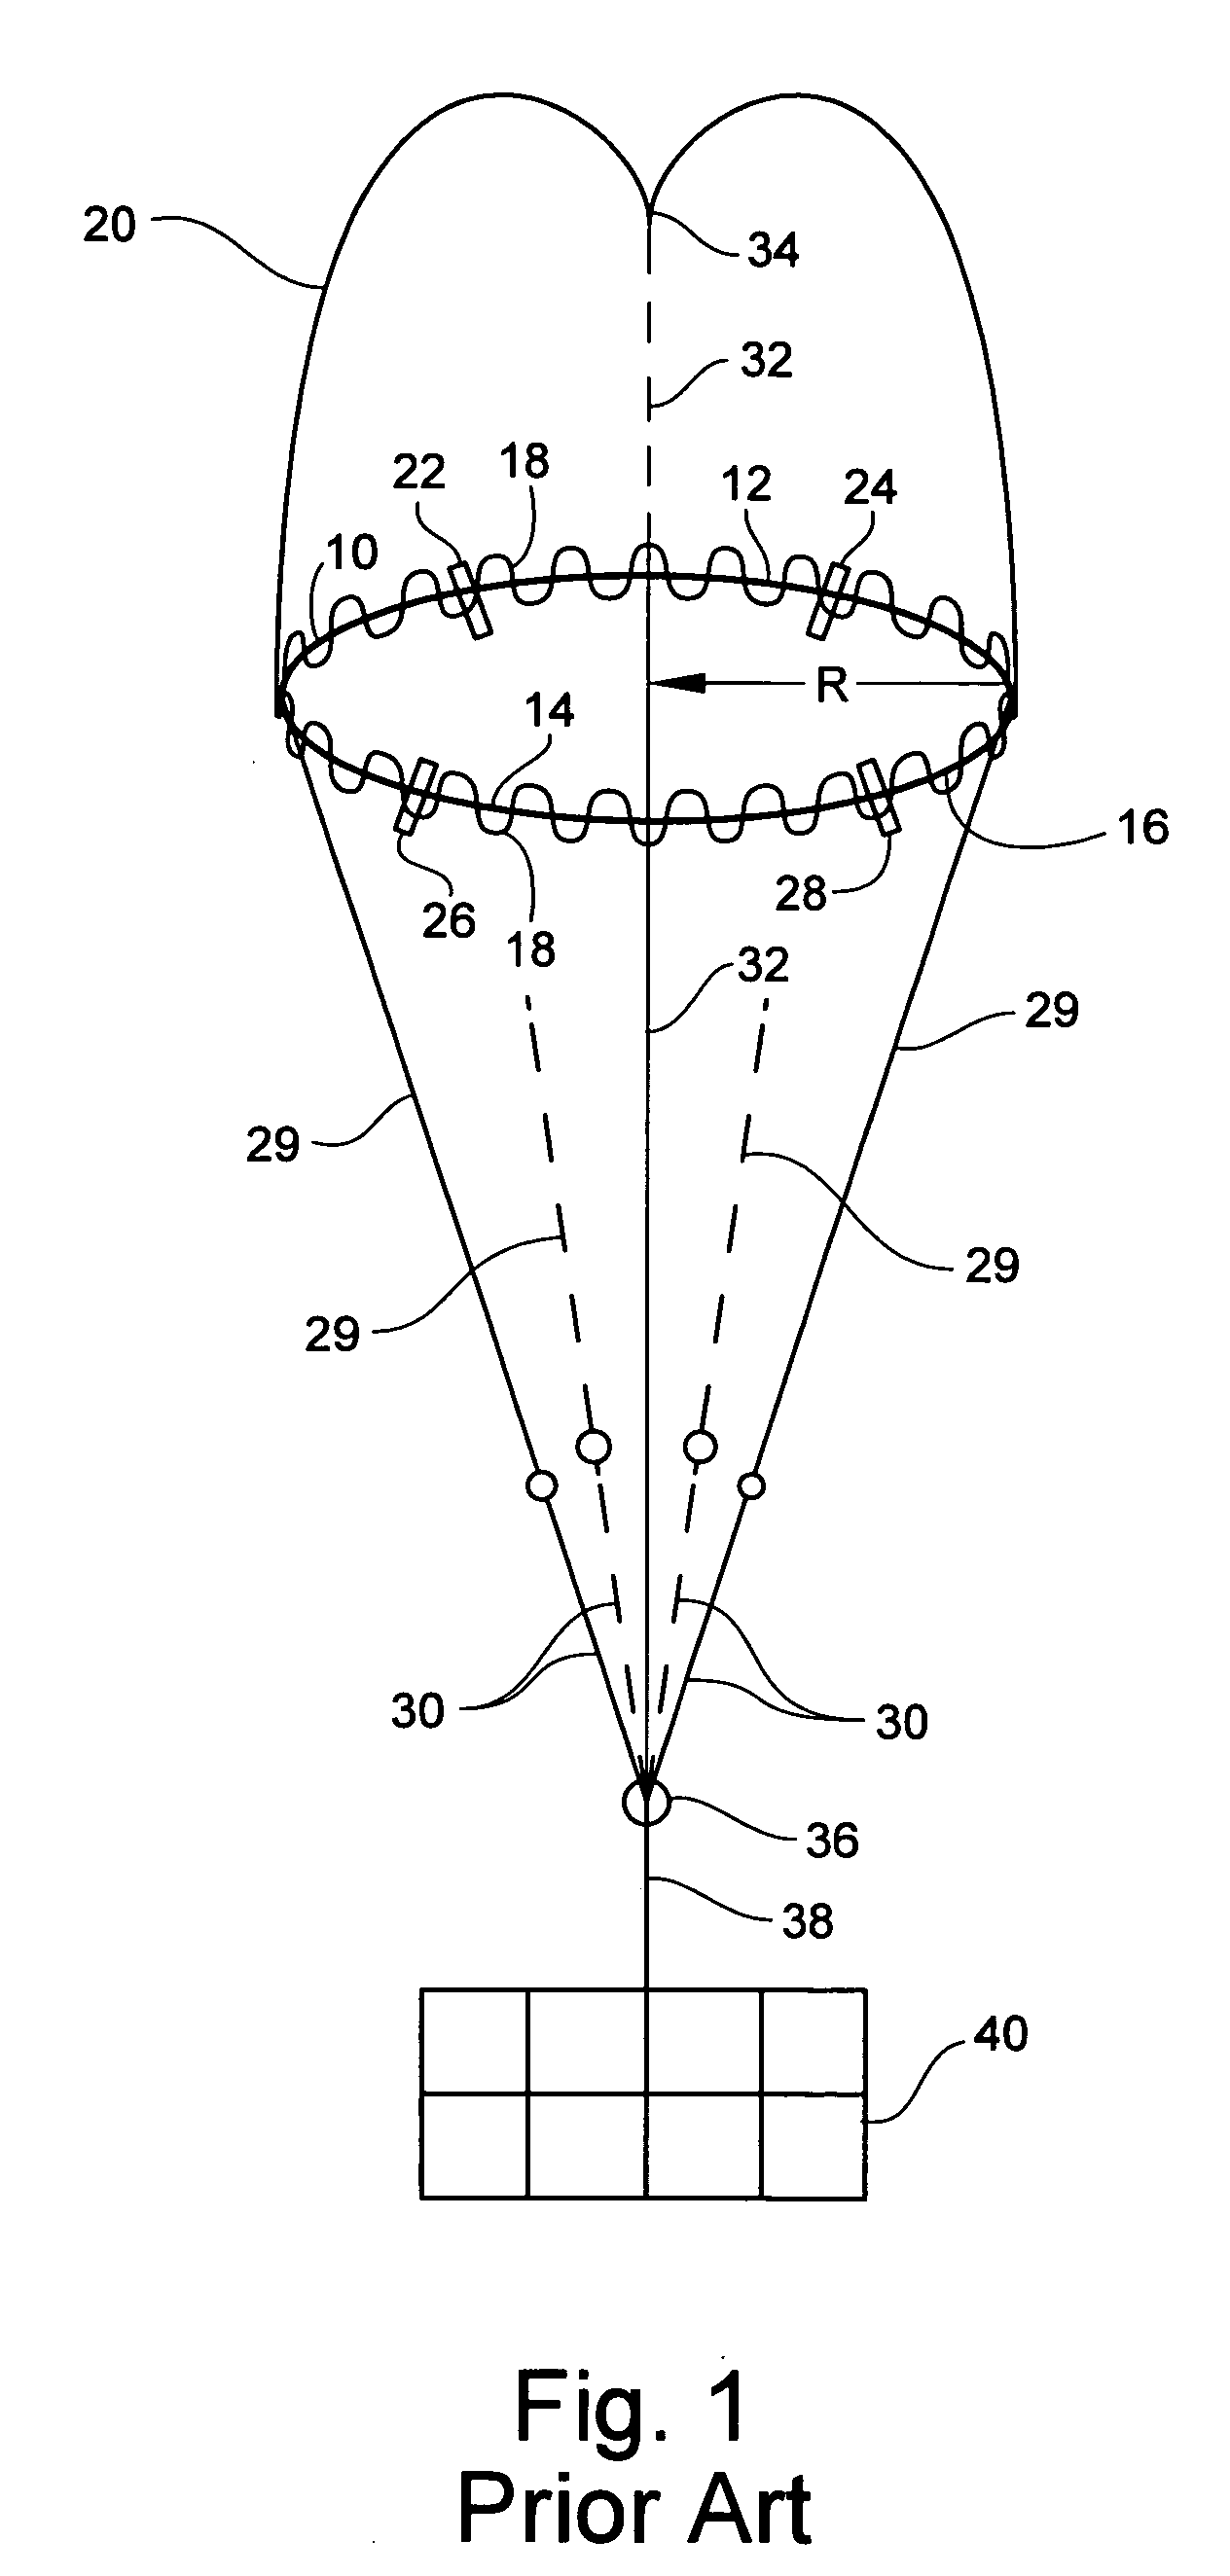 Parachute with skirt reefing system